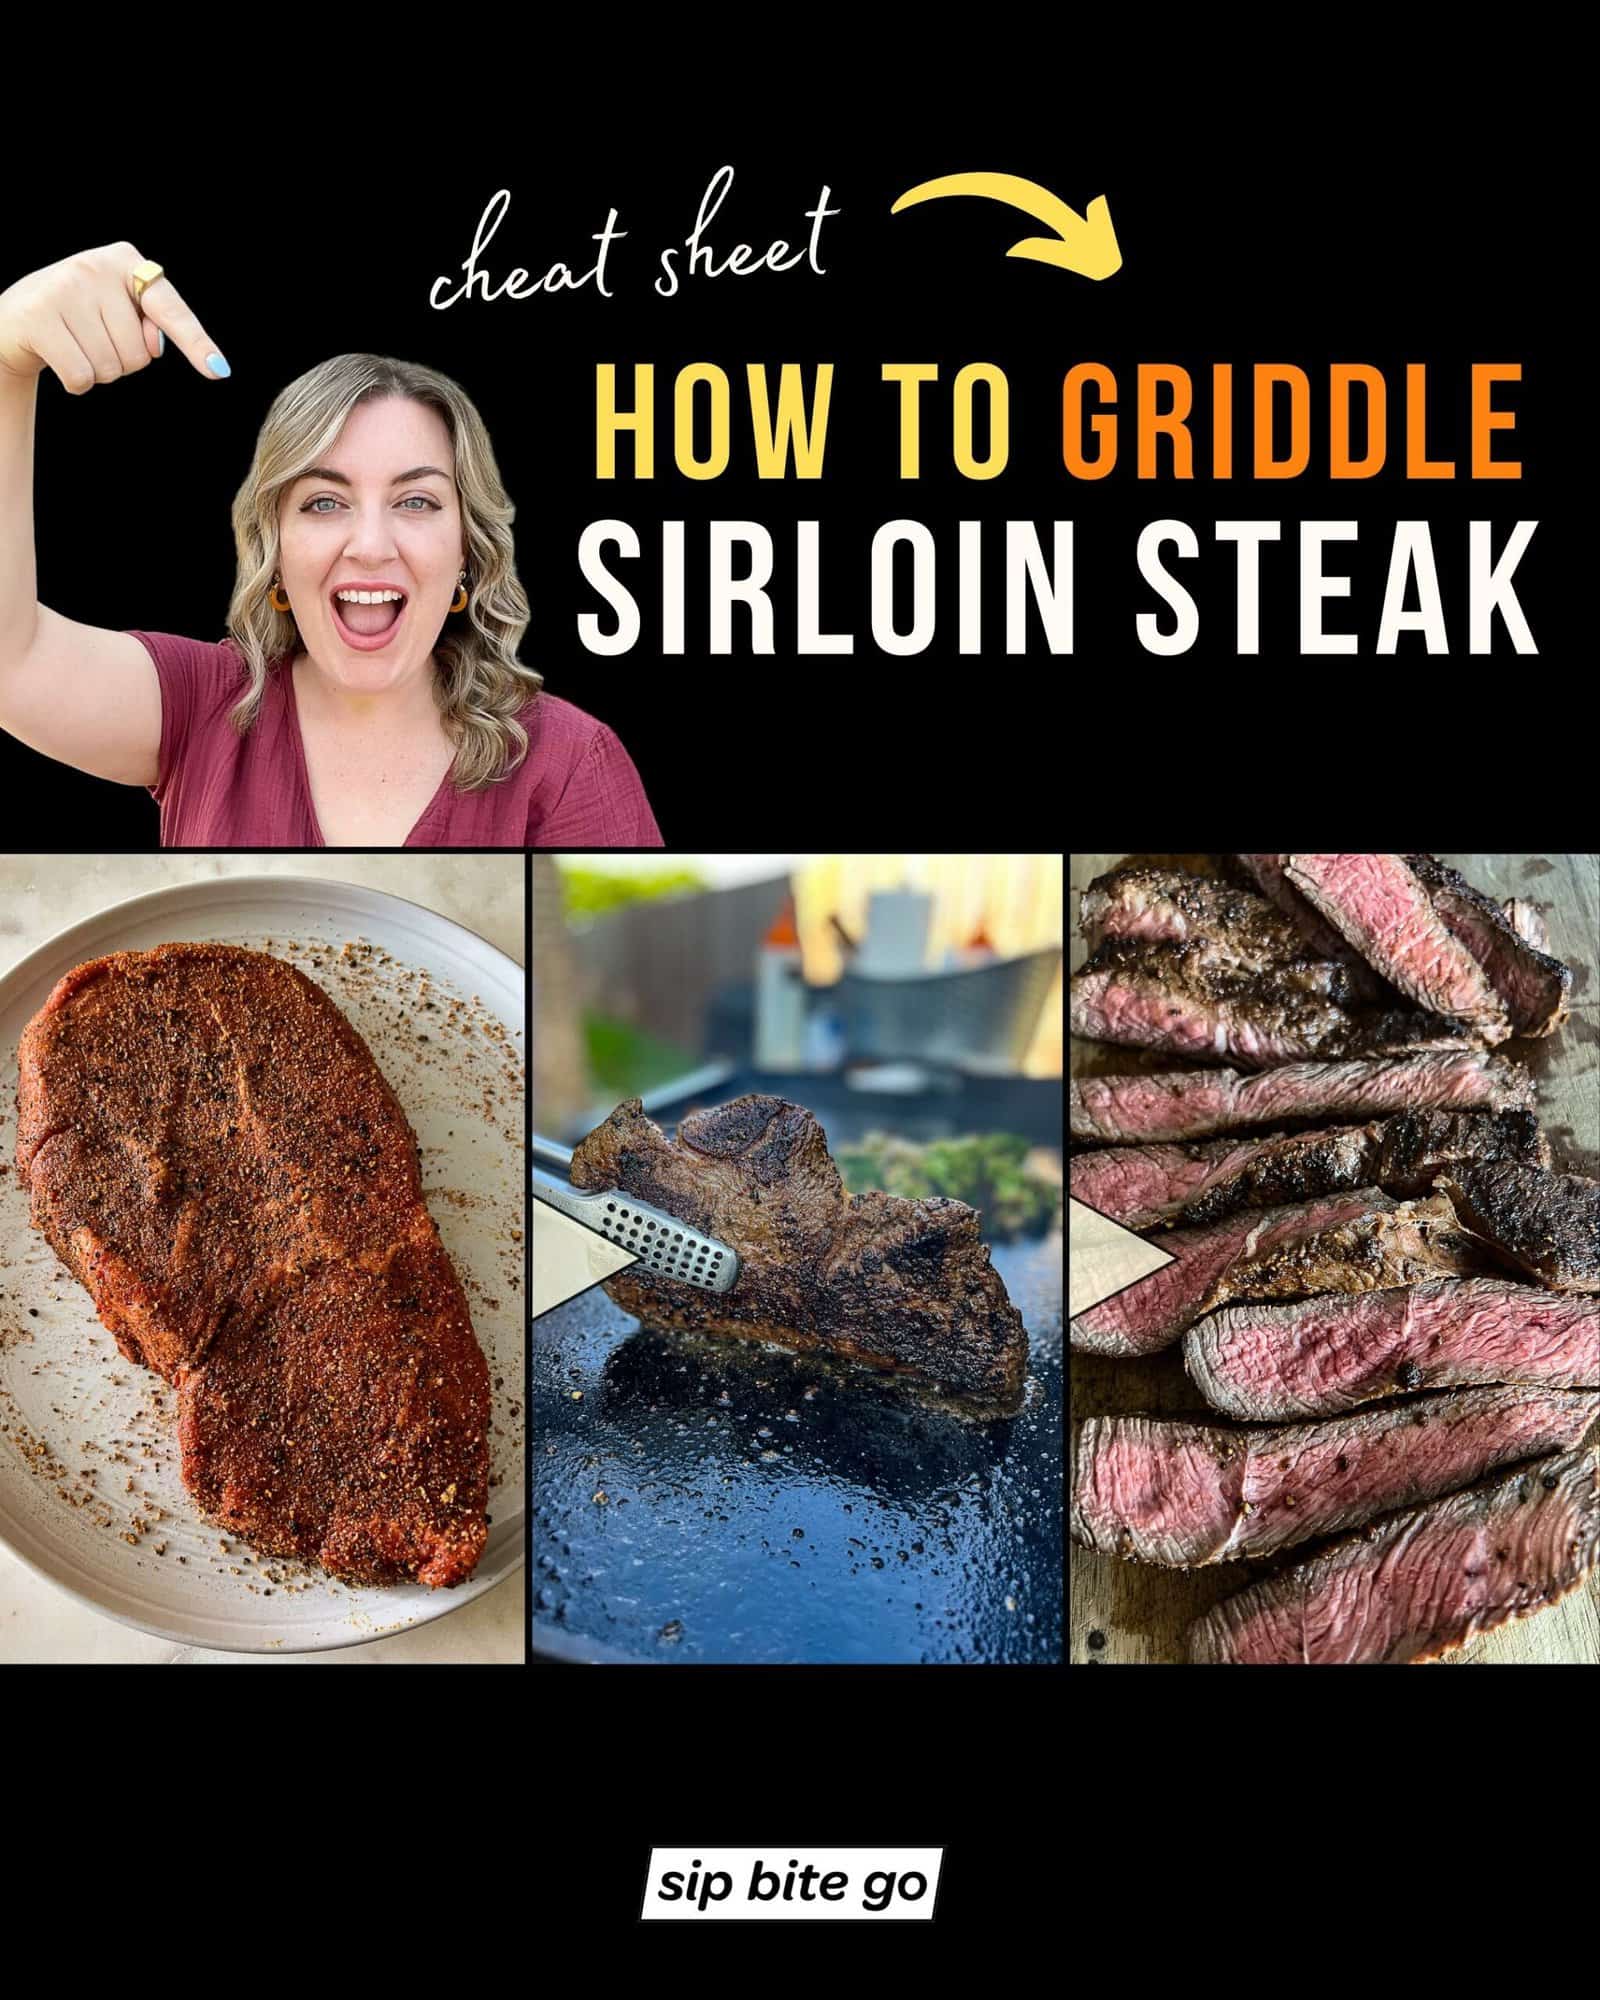 Infographic with recipe steps depicting how to cook griddled sirloin steak on the flattop with Jenna Passaro from Sip Bite Go